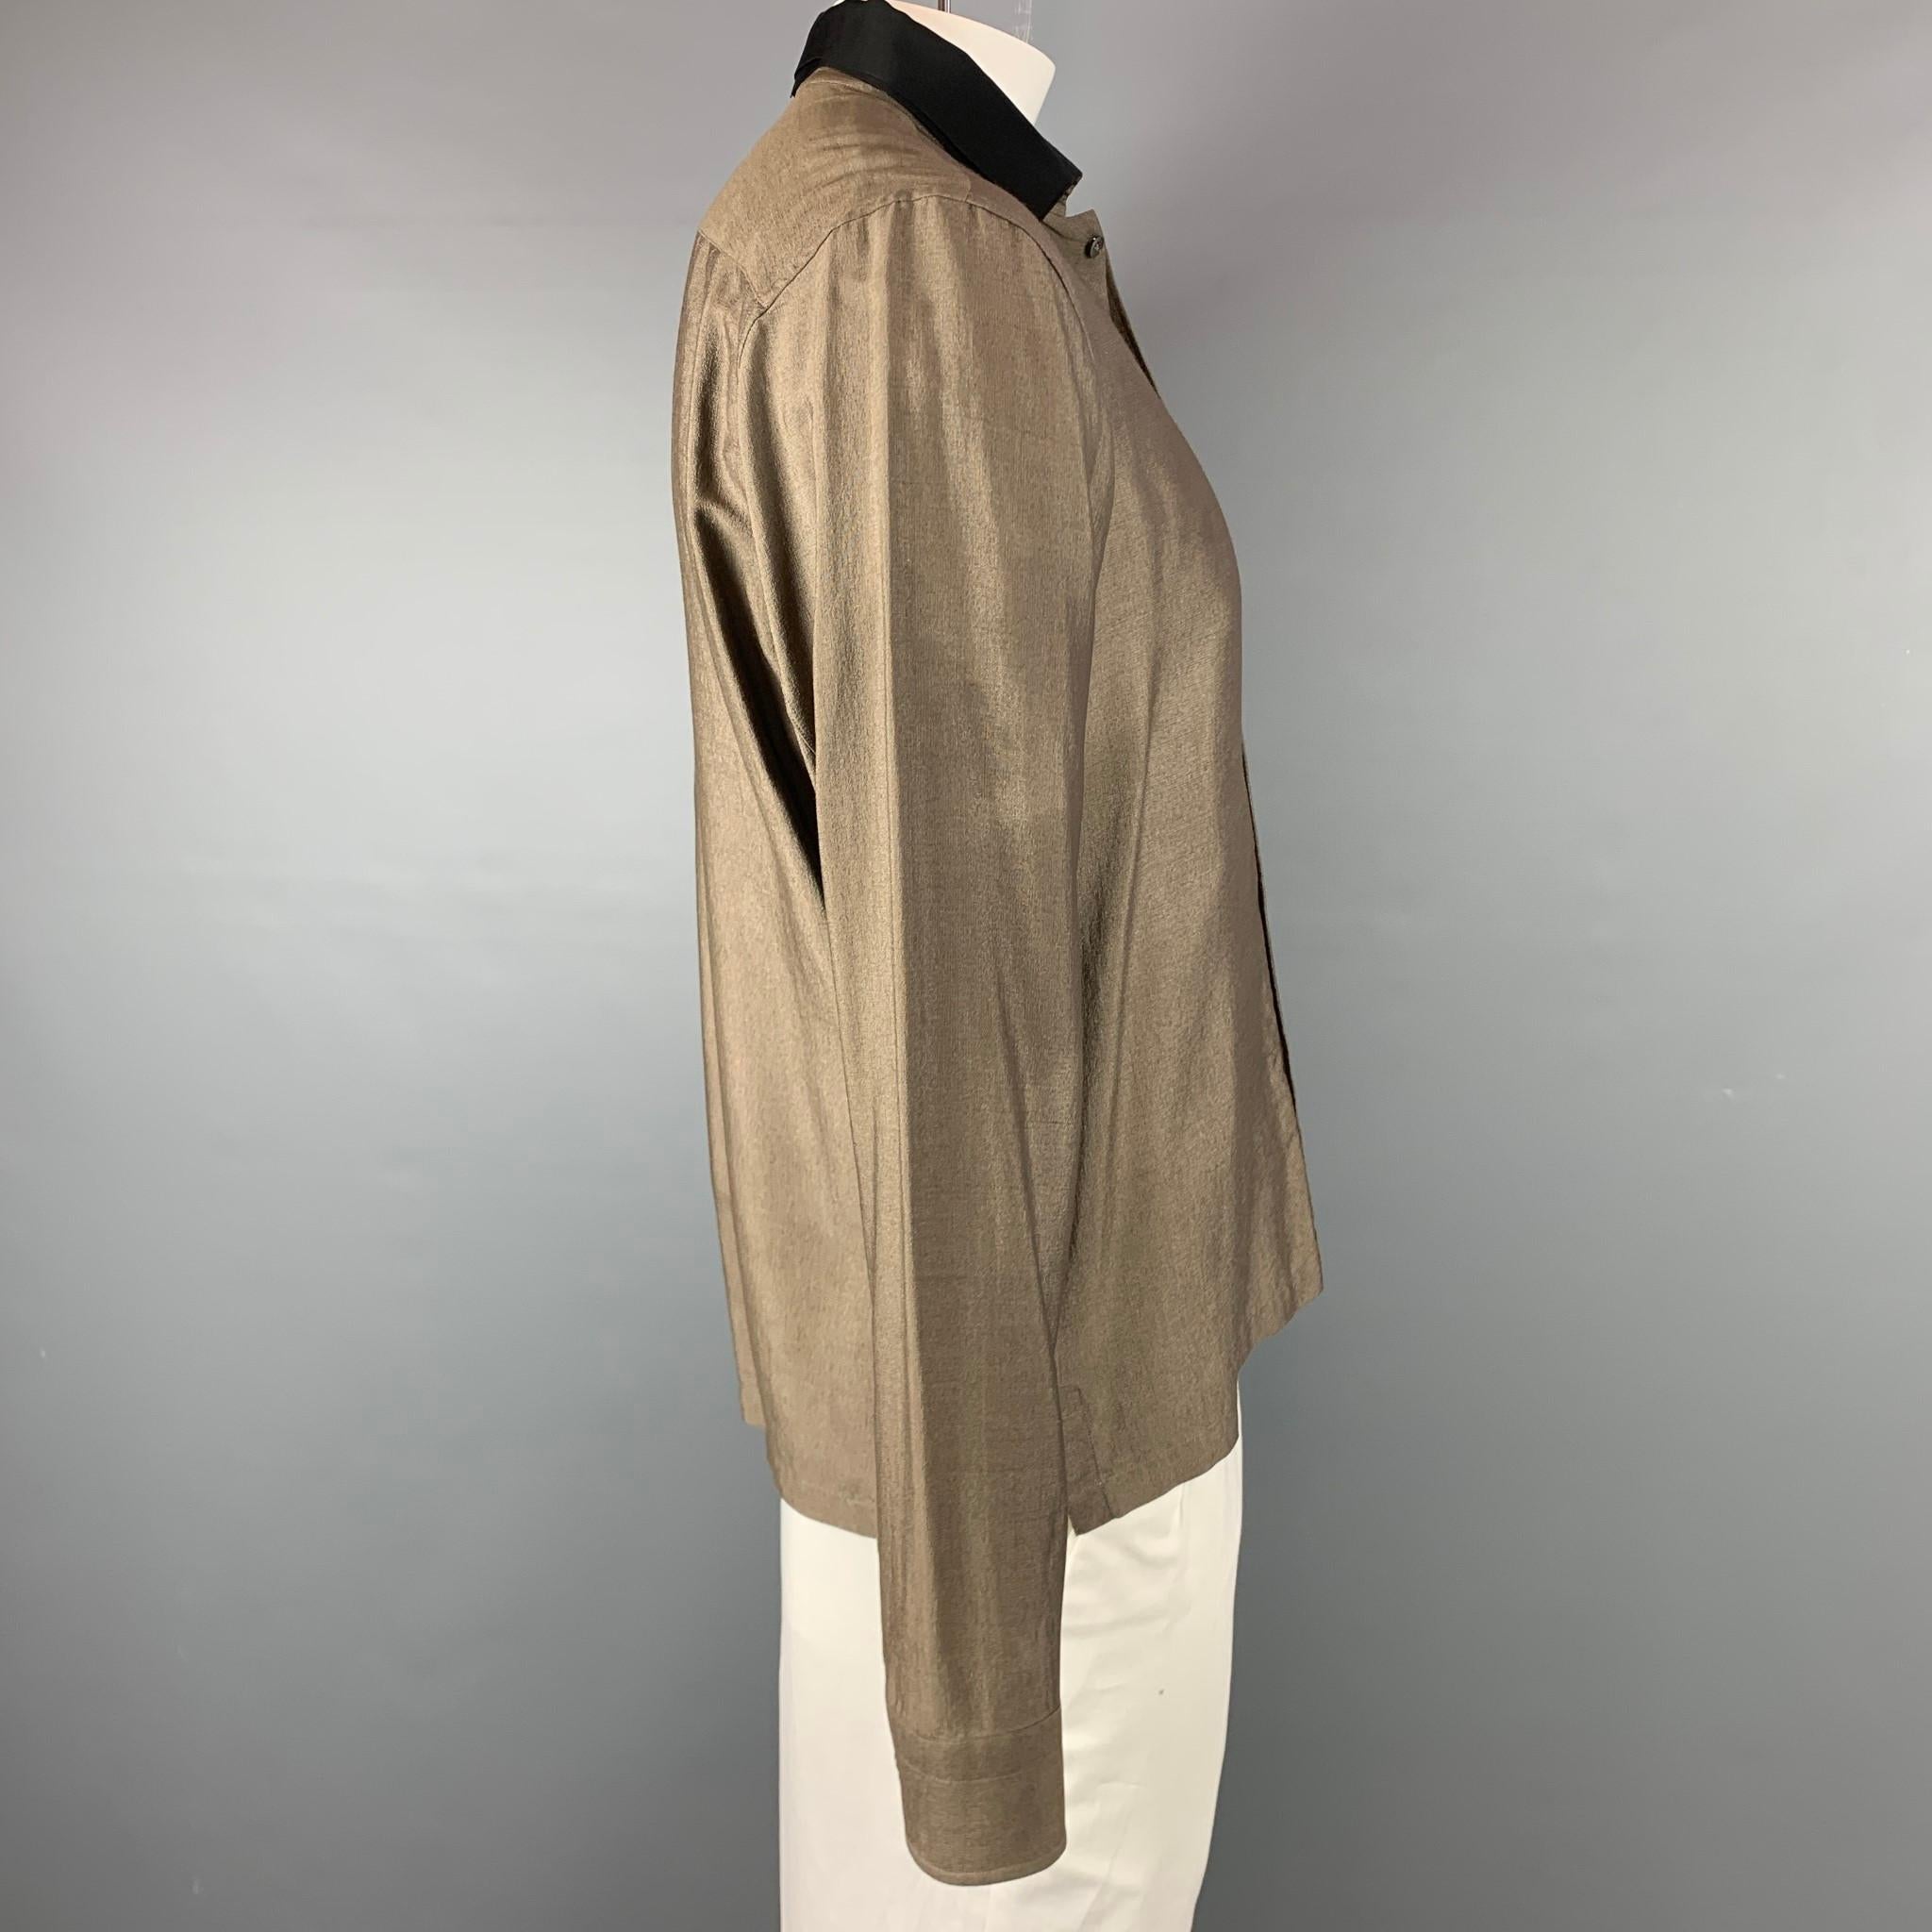 LANVIN long sleeve shirt comes in a olive silk / wool featuring a button up style, patch pocket, and a black spread collar. Made in Italy.

Very Good Pre-Owned Condition.
Marked: 41/16

Measurements:

Shoulder: 18.5 in.
Chest: 44 in.
Sleeve: 27